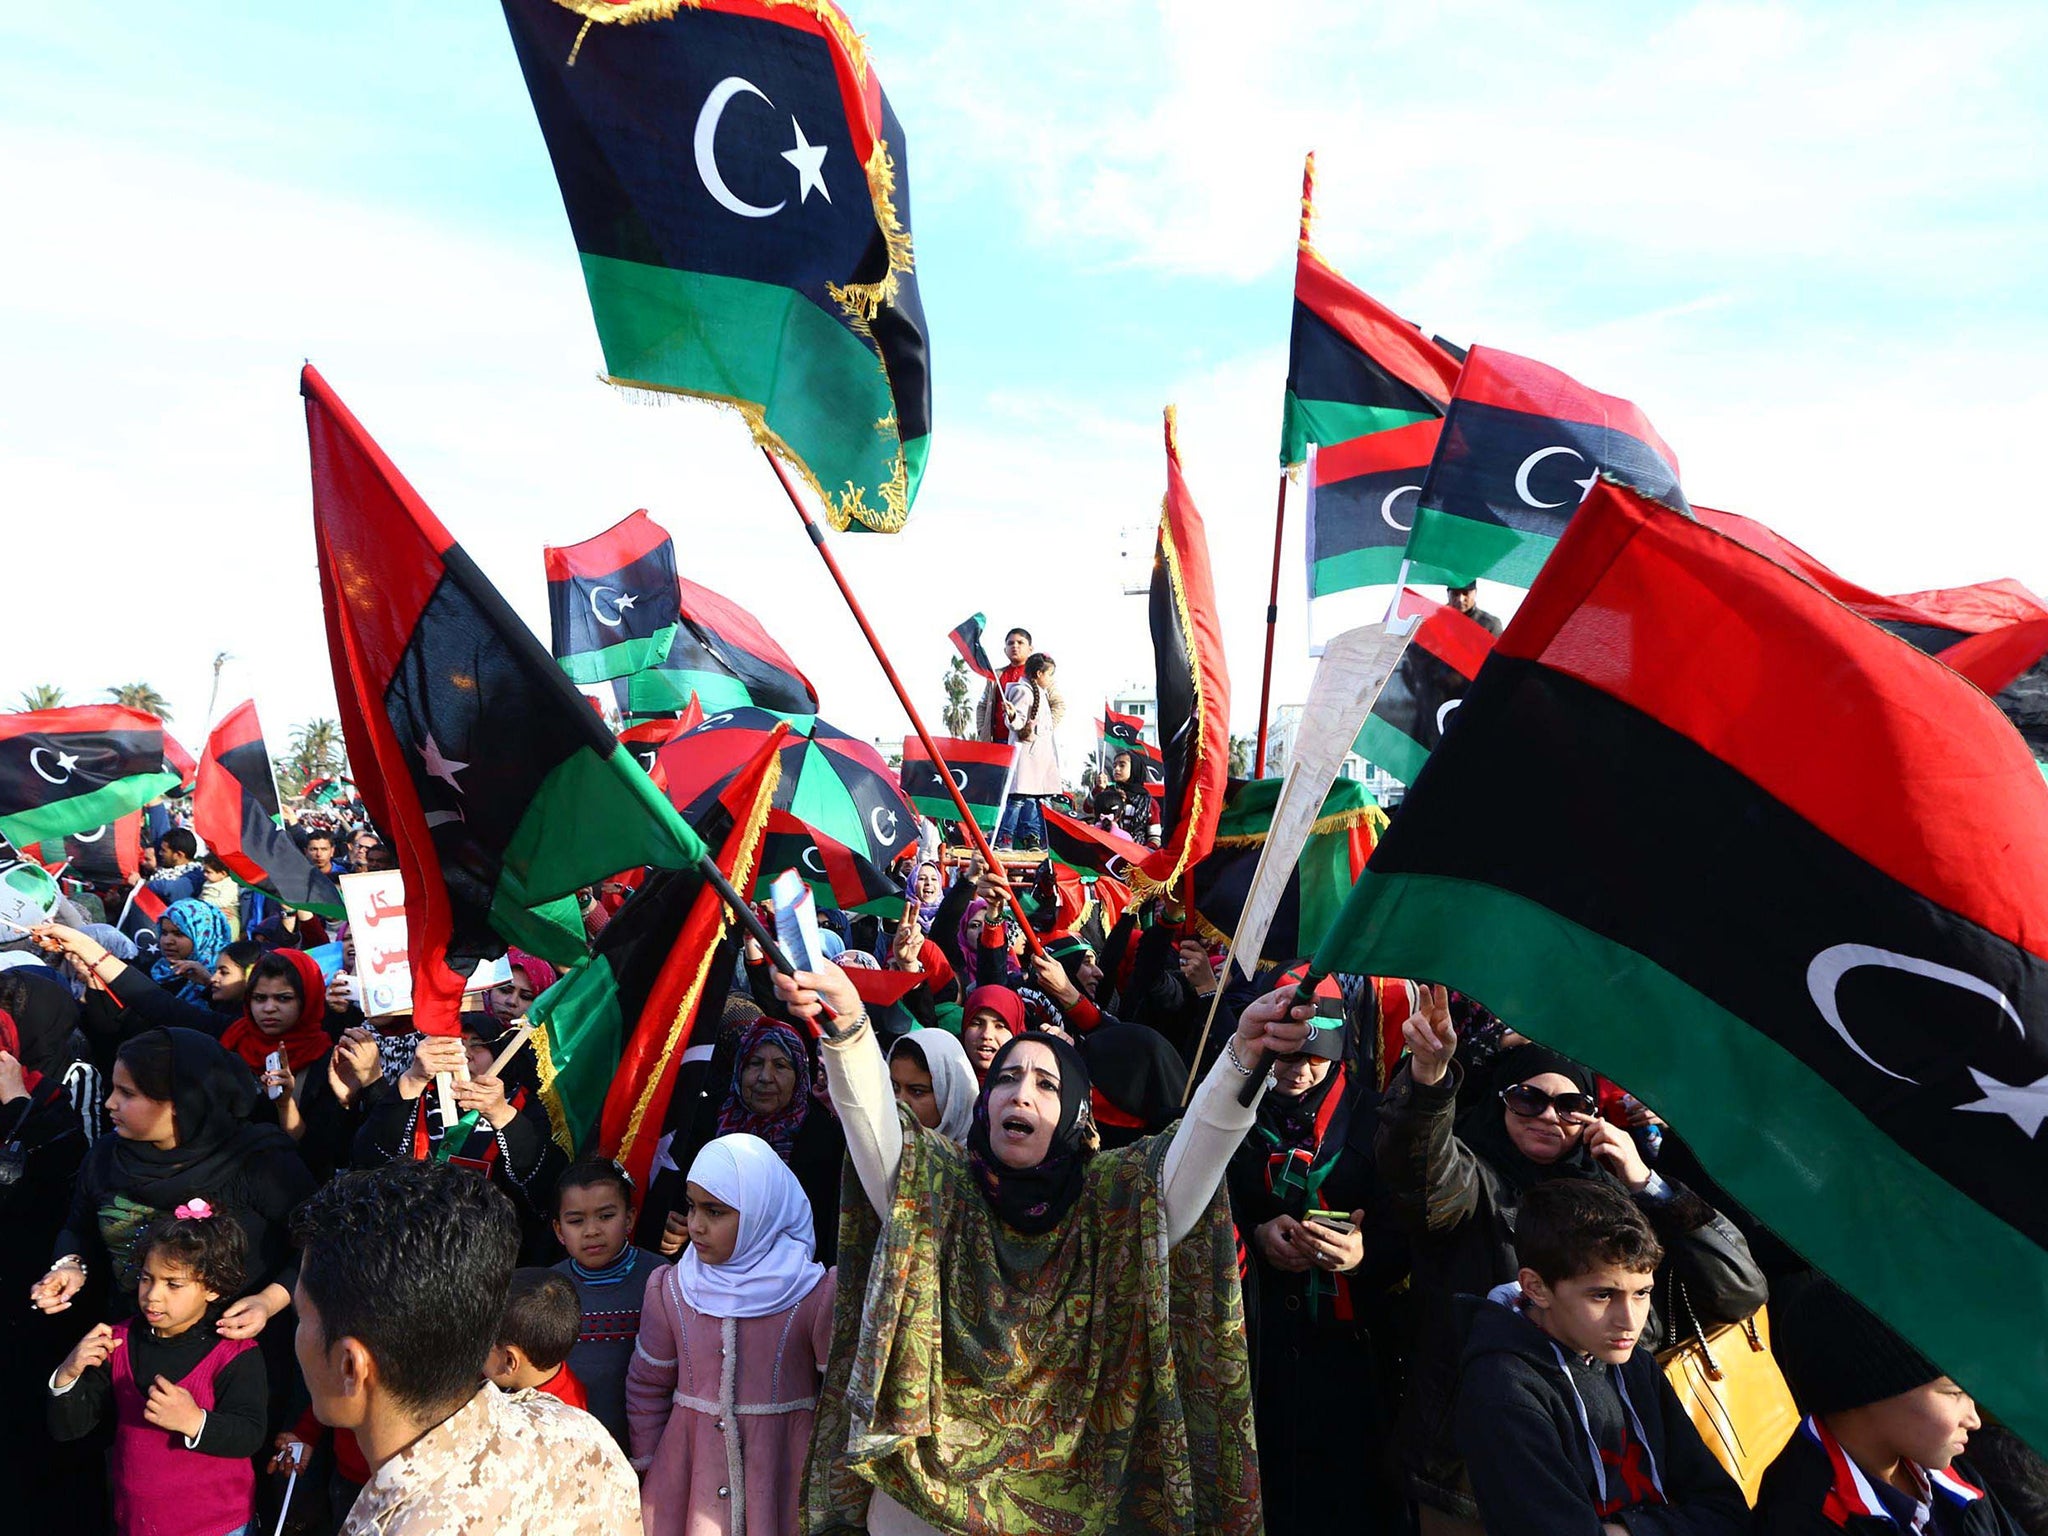 Libyans celebrate the upcoming fourth anniversary of their revolution this week. The West recognises that instability presents a new risk in the fight against Isis